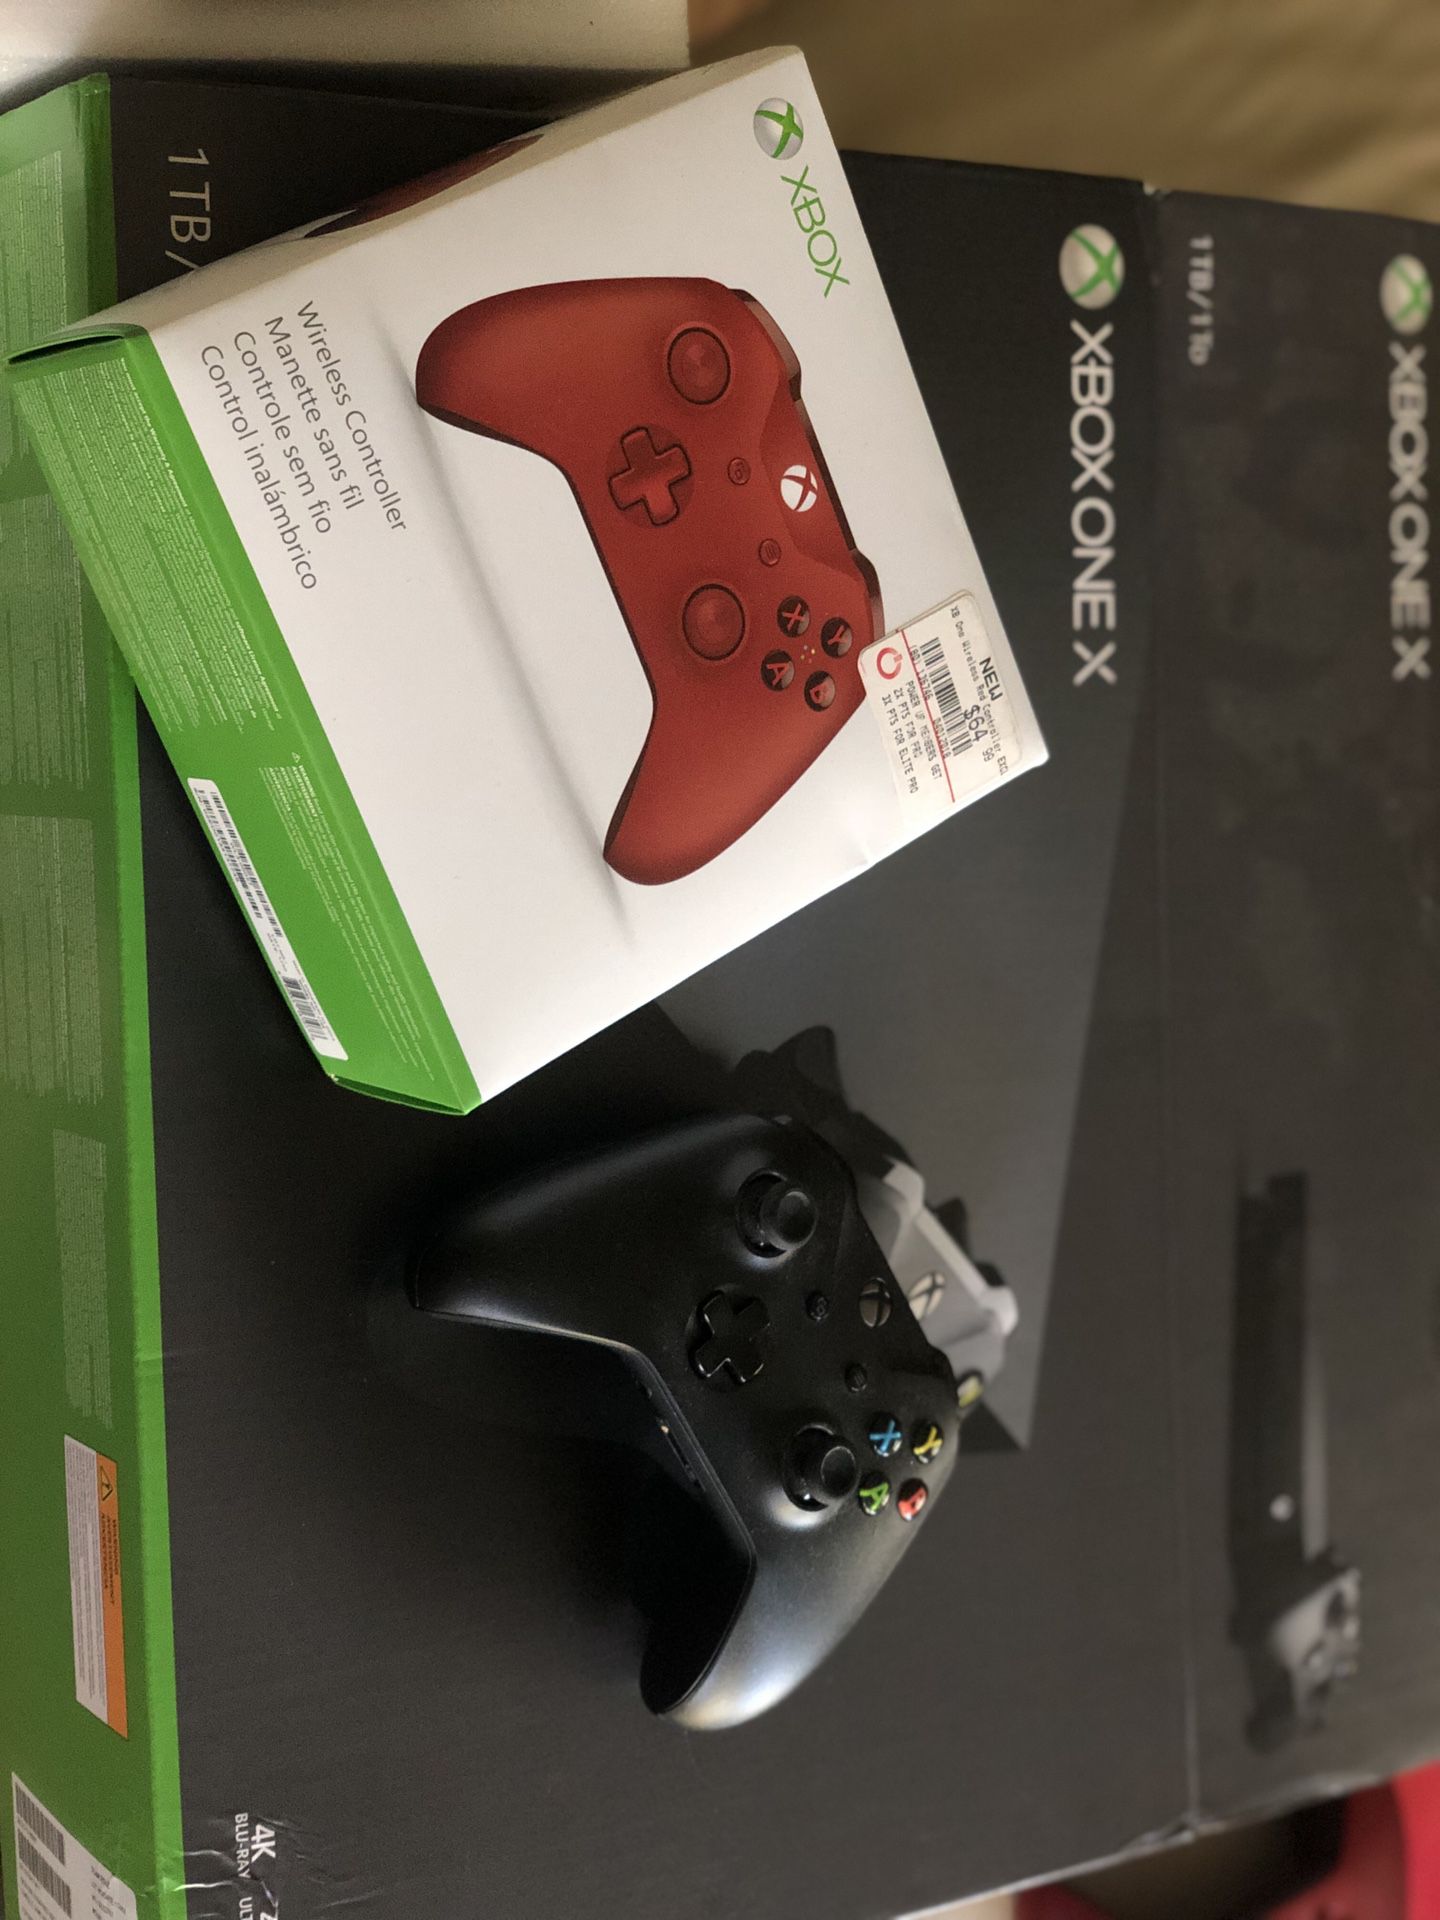 XBOX ONE X / Red Controller/ Turtle Beach Headset